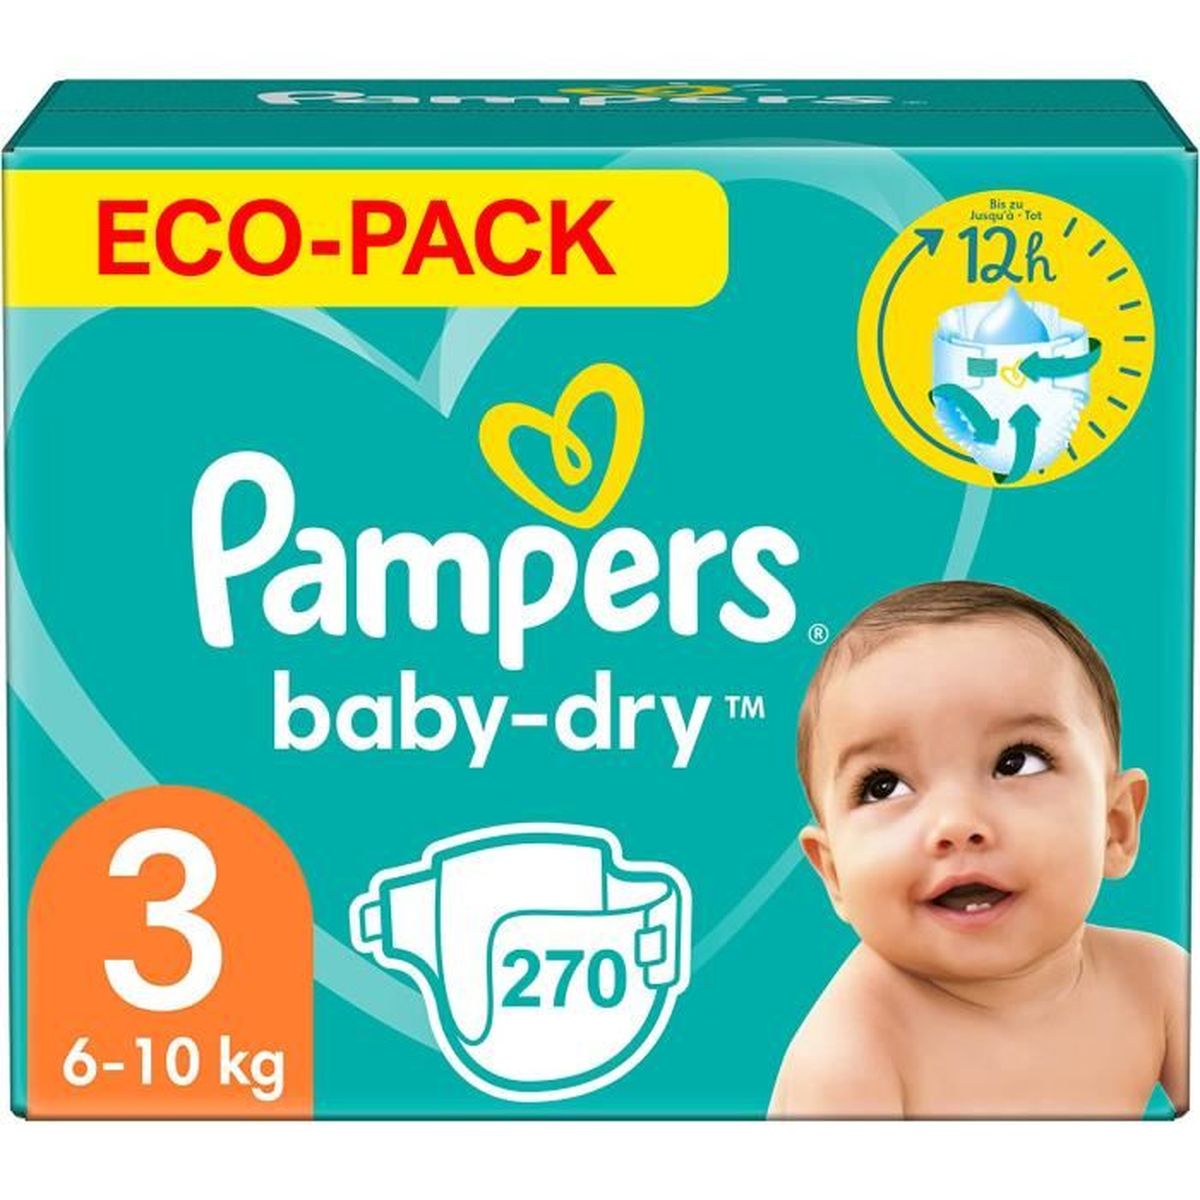 https://www.cdiscount.com/pdt2/3/8/5/1/1200x1200/pam8001090336385/rw/pampers-baby-dry-taille-3-270-couches-6-10-kg.jpg